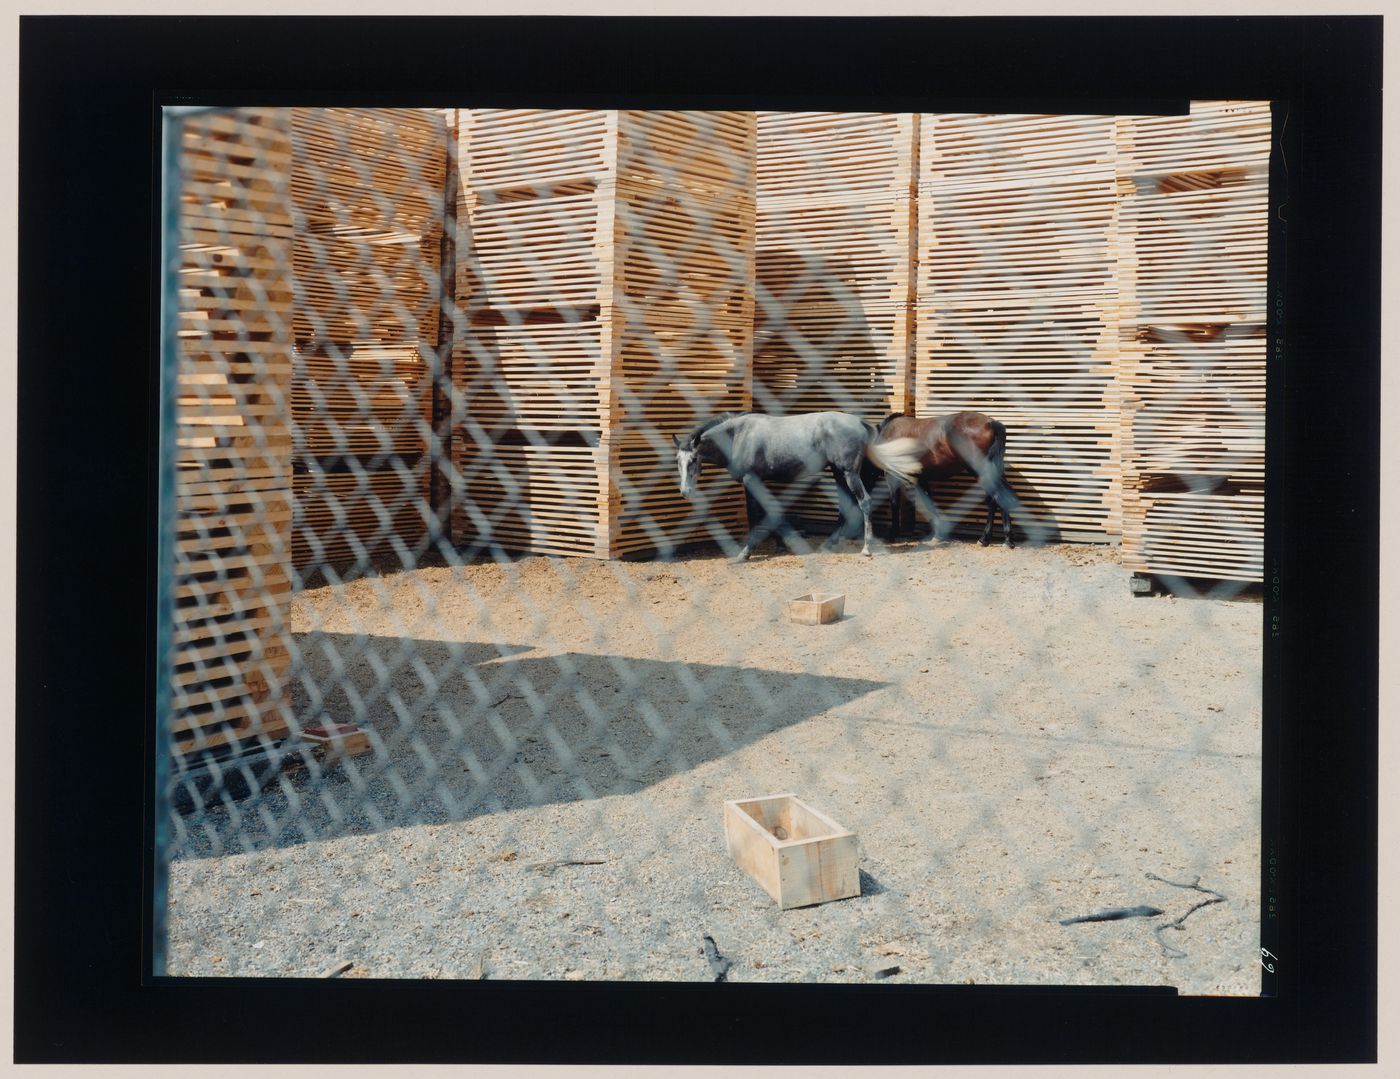 View through a chain link fence of two horses surrounded by stacks of wooden construction palettes, Spain (from the series "In between cities")